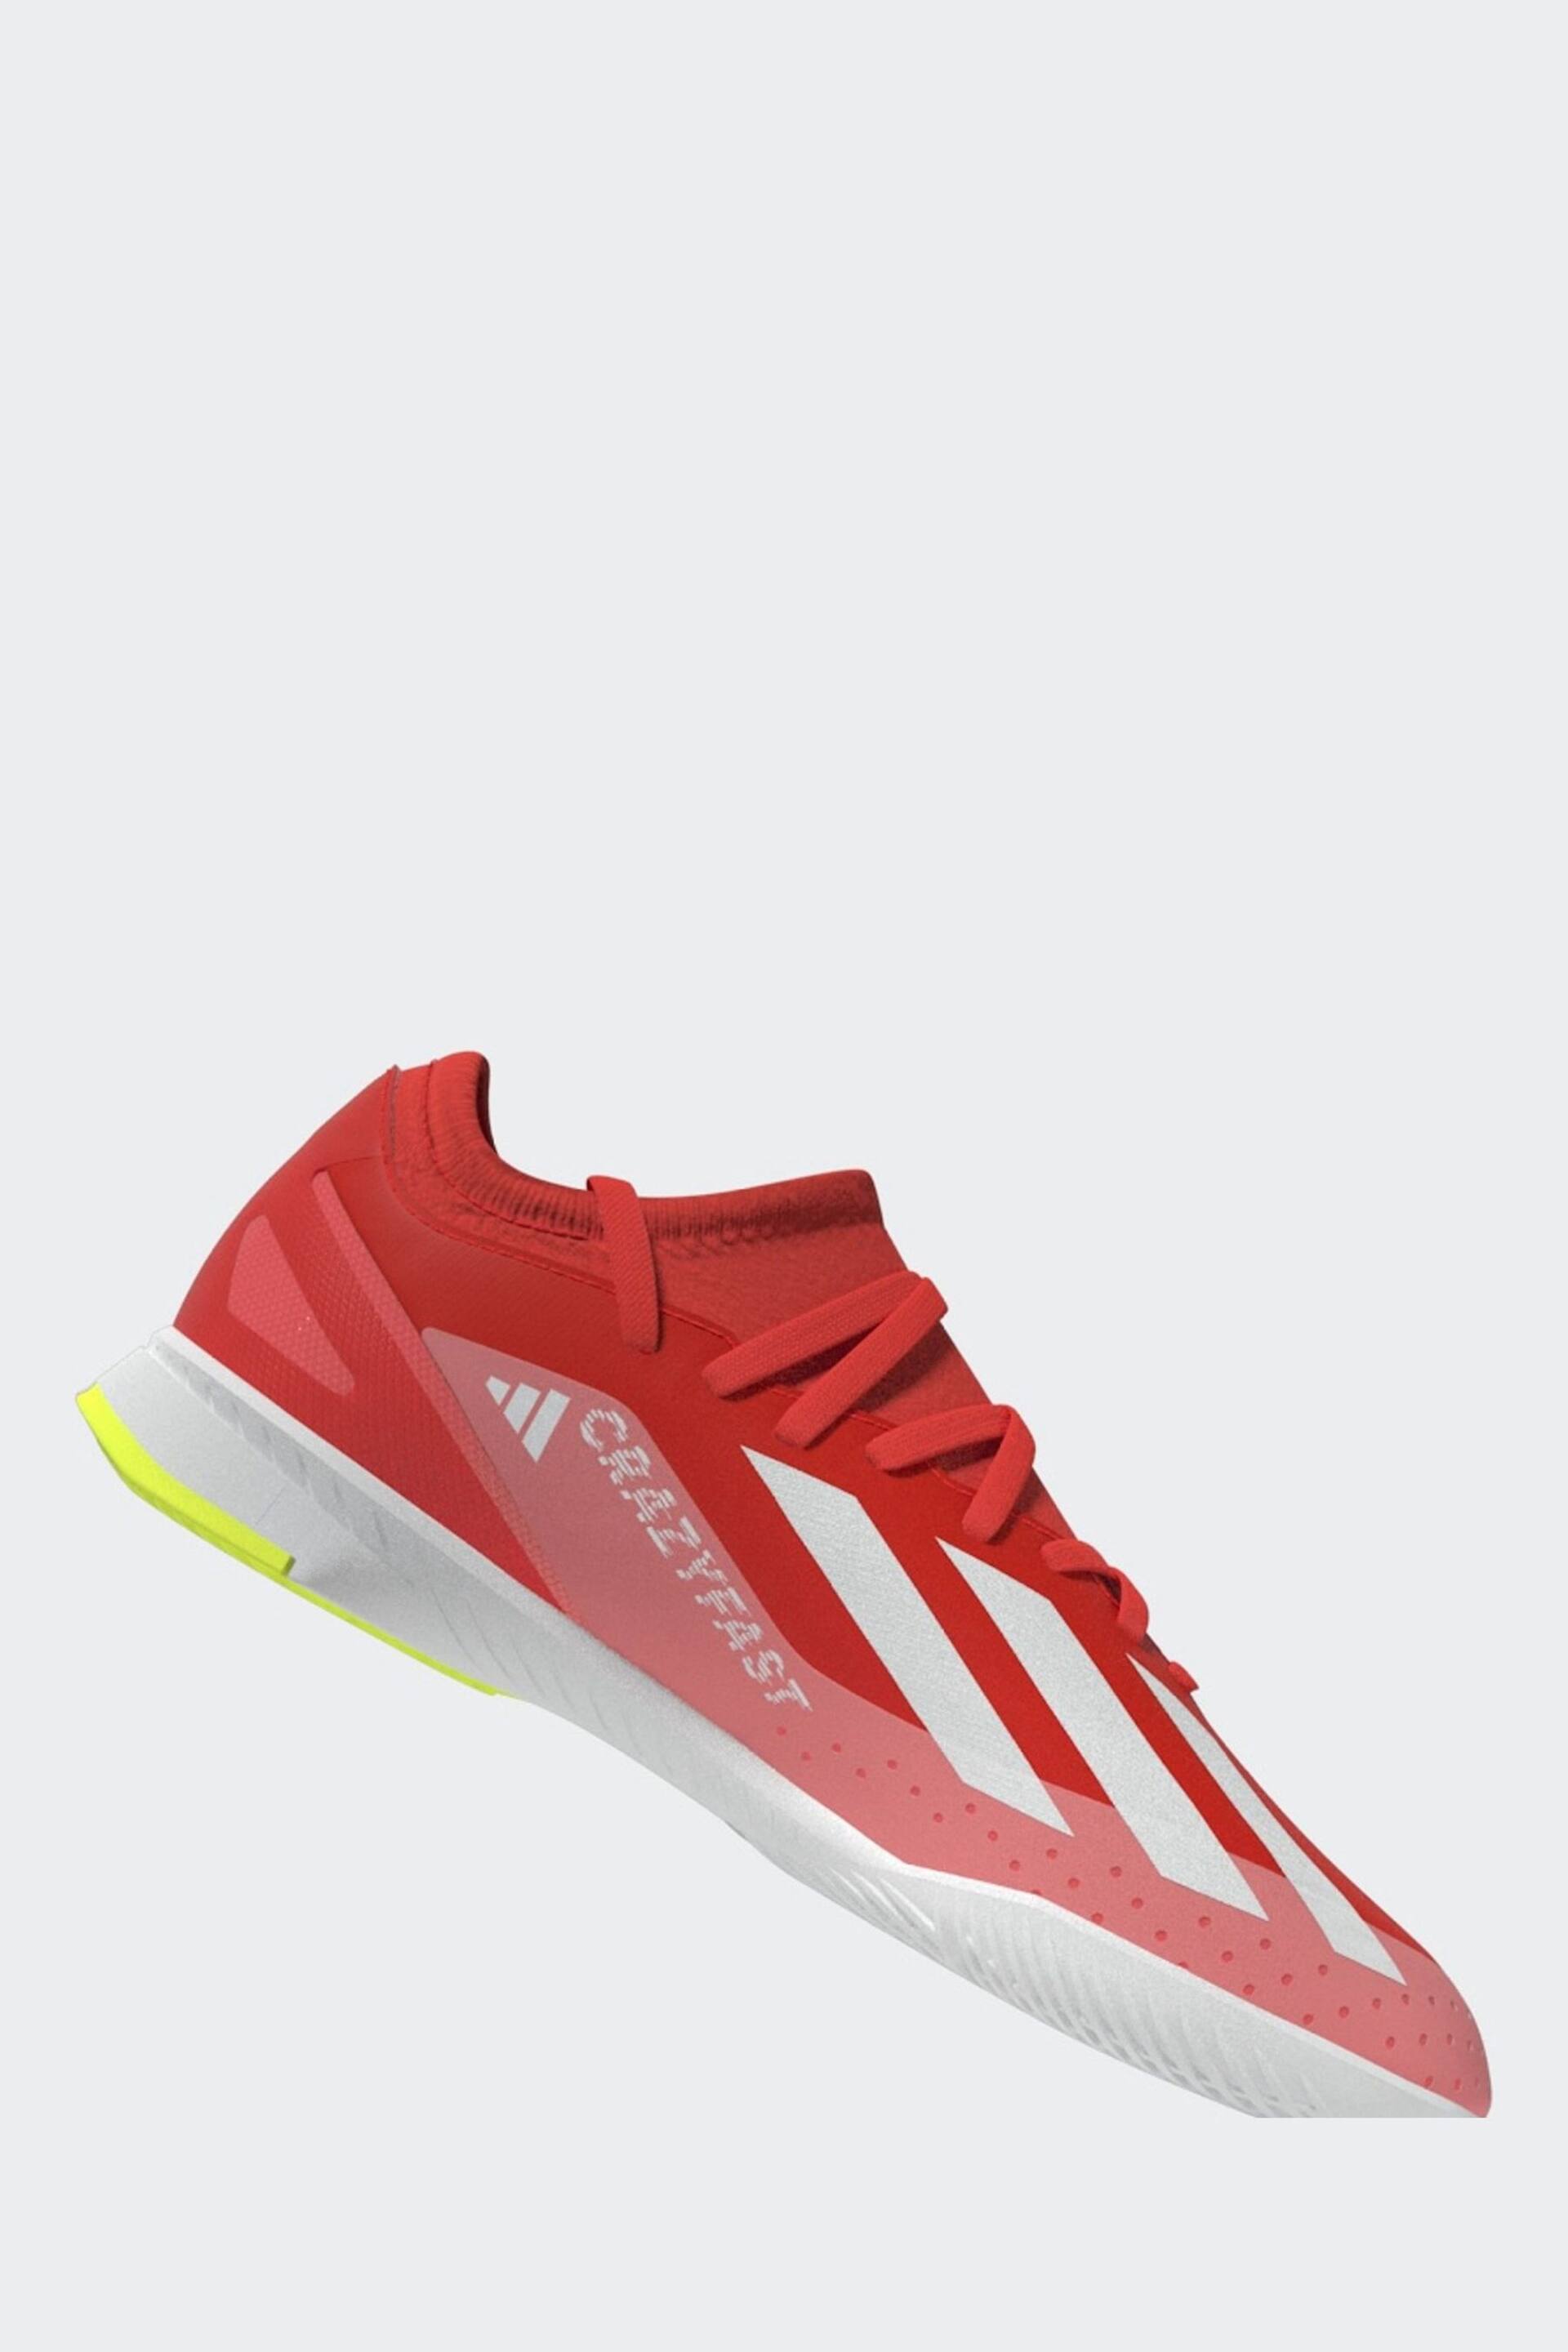 adidas Red/White Football X Crazyfast League Indoor Kids Boots - Image 6 of 20